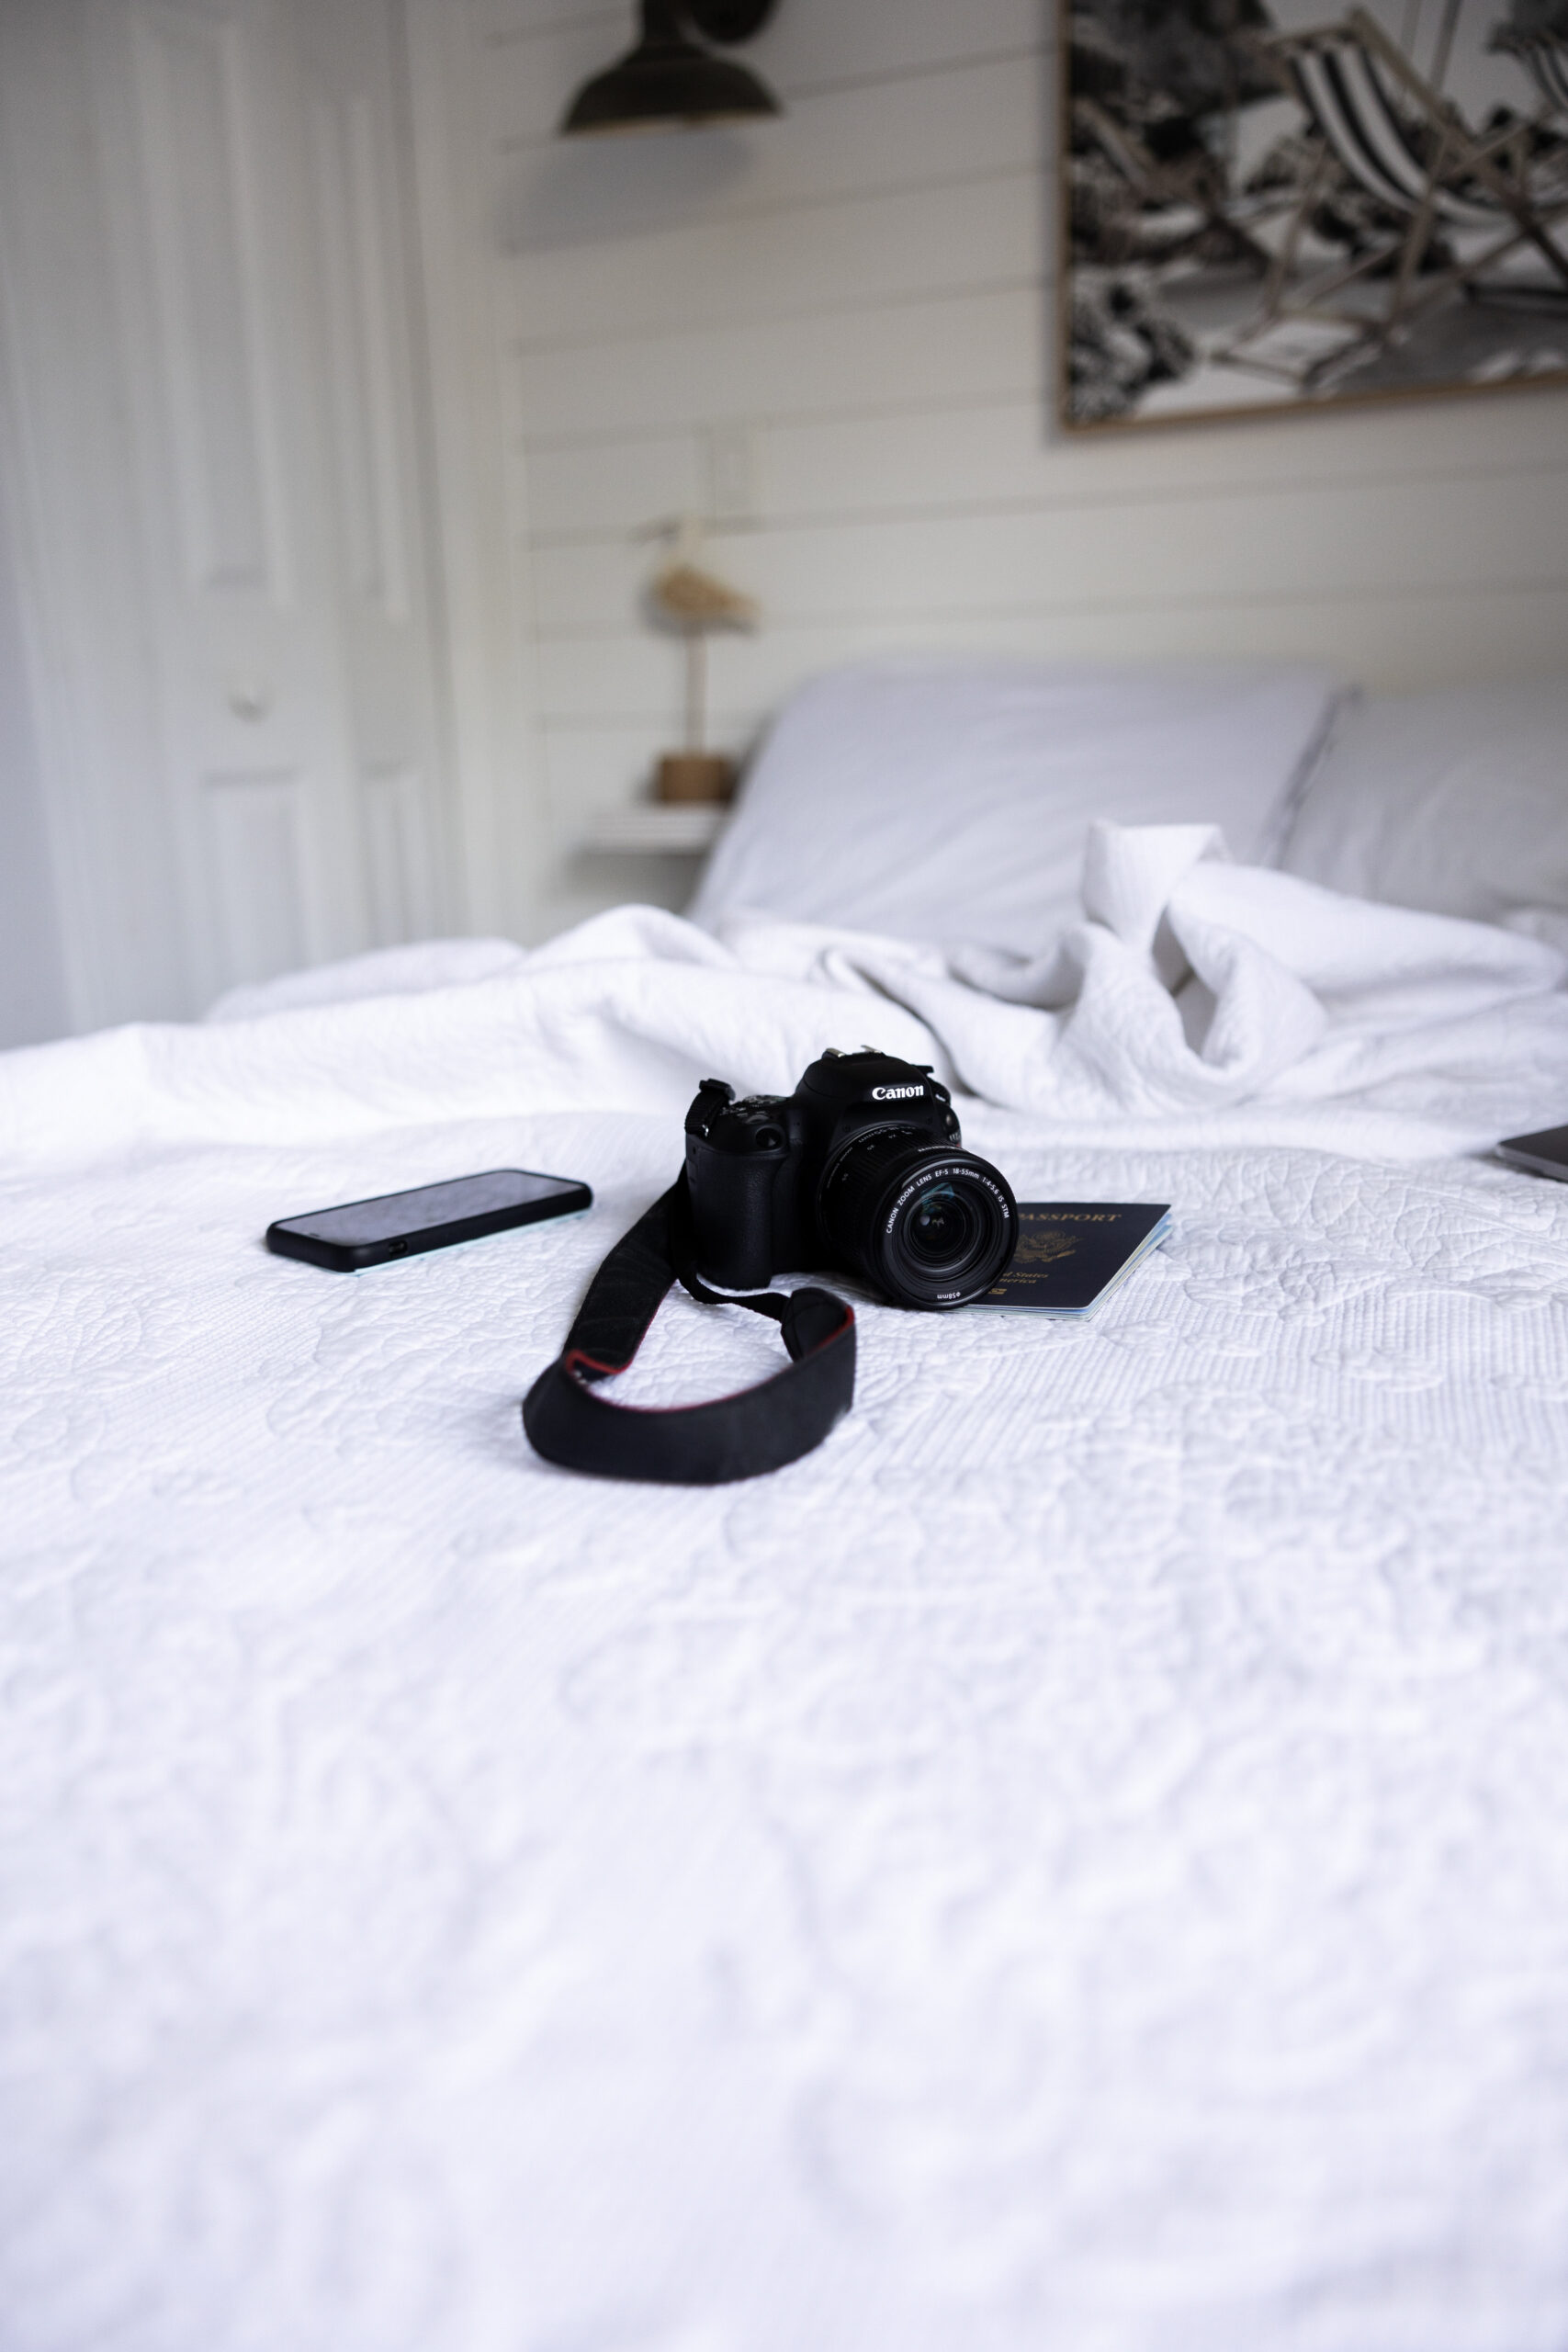 cannon camera sitting on a full size bed with white sheets and a phone placed next to the camera